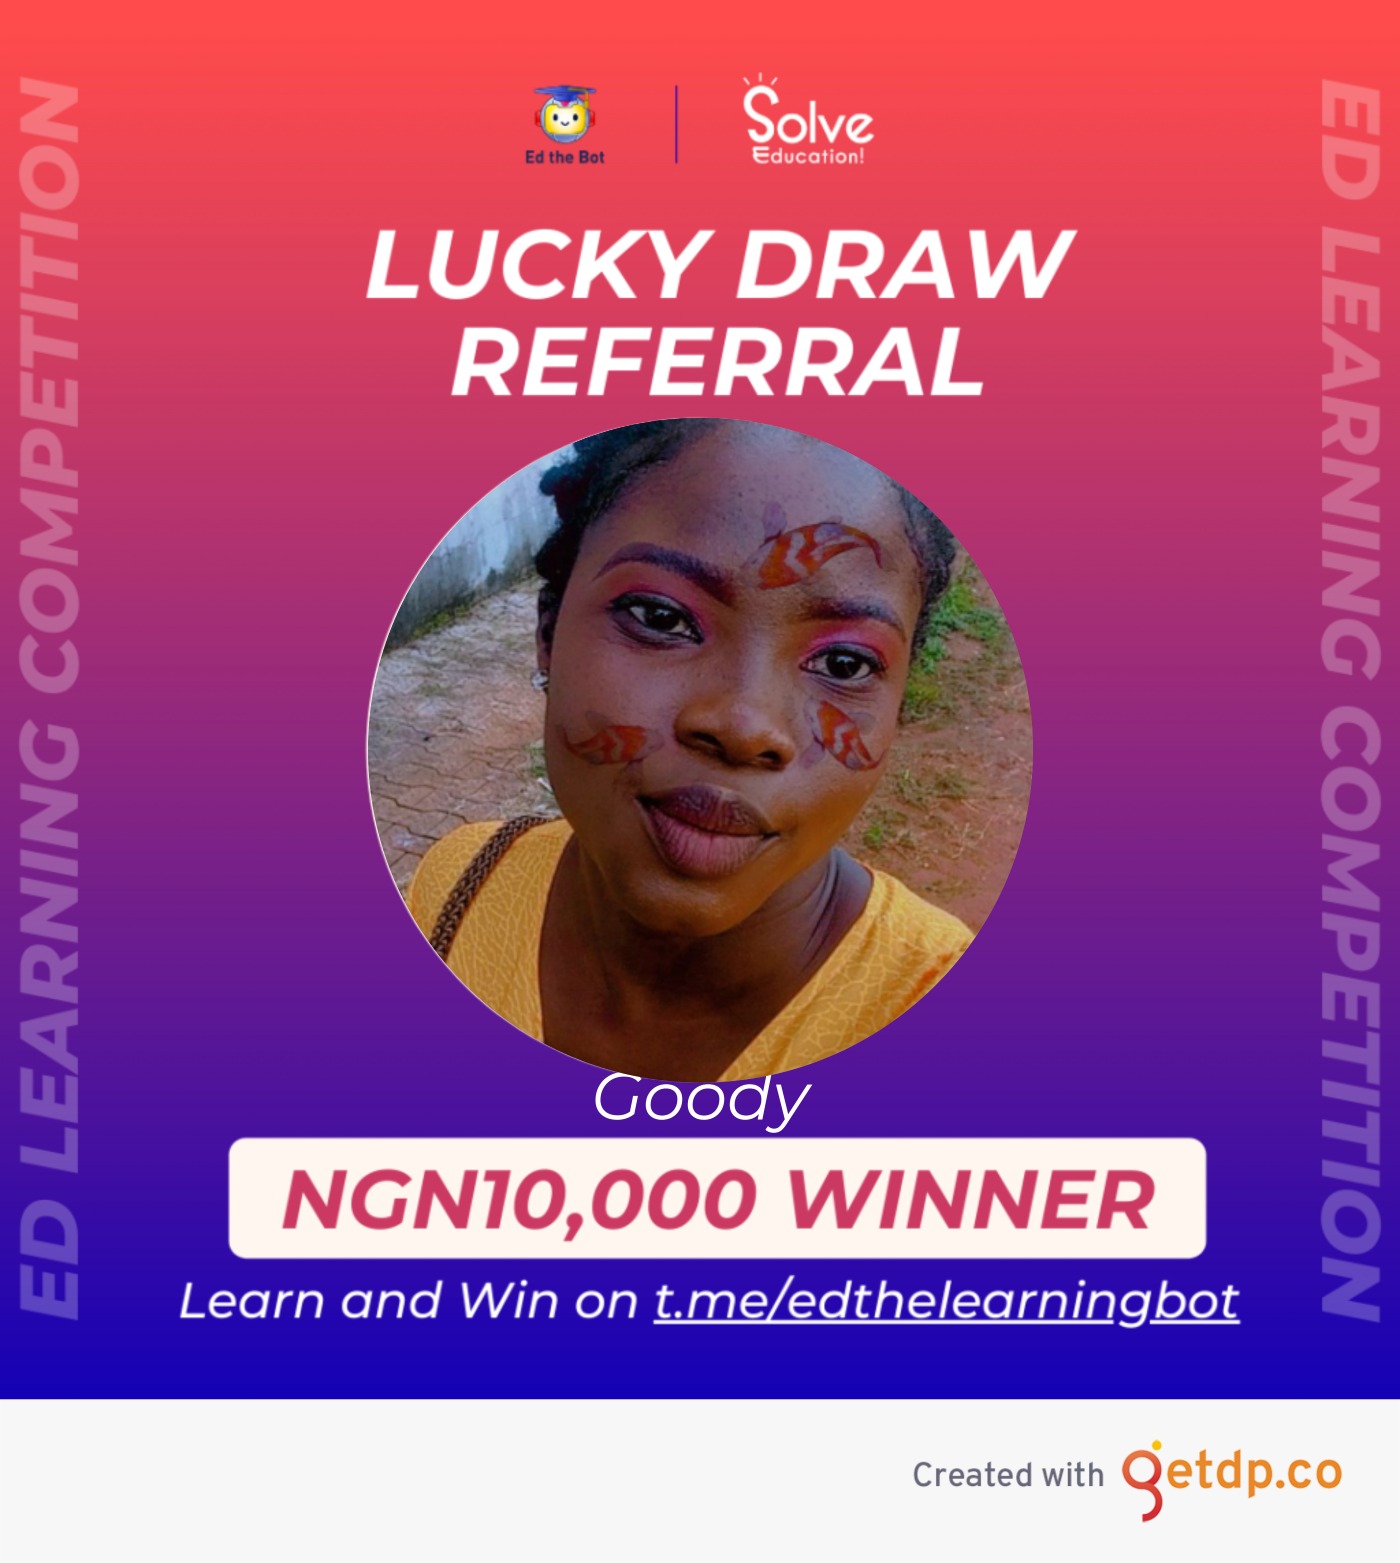 Lucky draw referral on Ed the learning bot